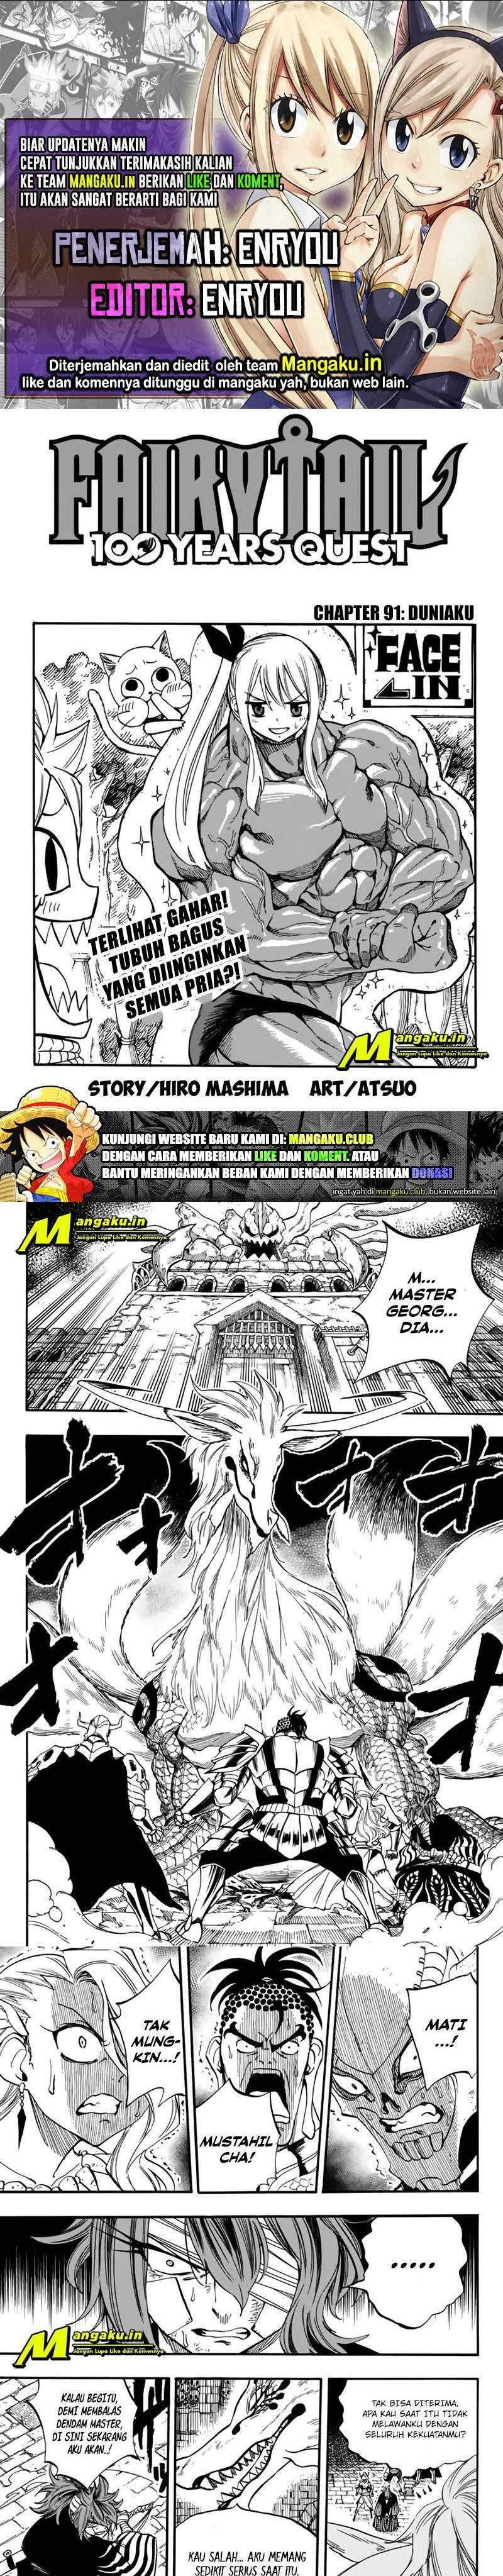 Fairy Tail: 100 Years Quest: Chapter 91 - Page 1